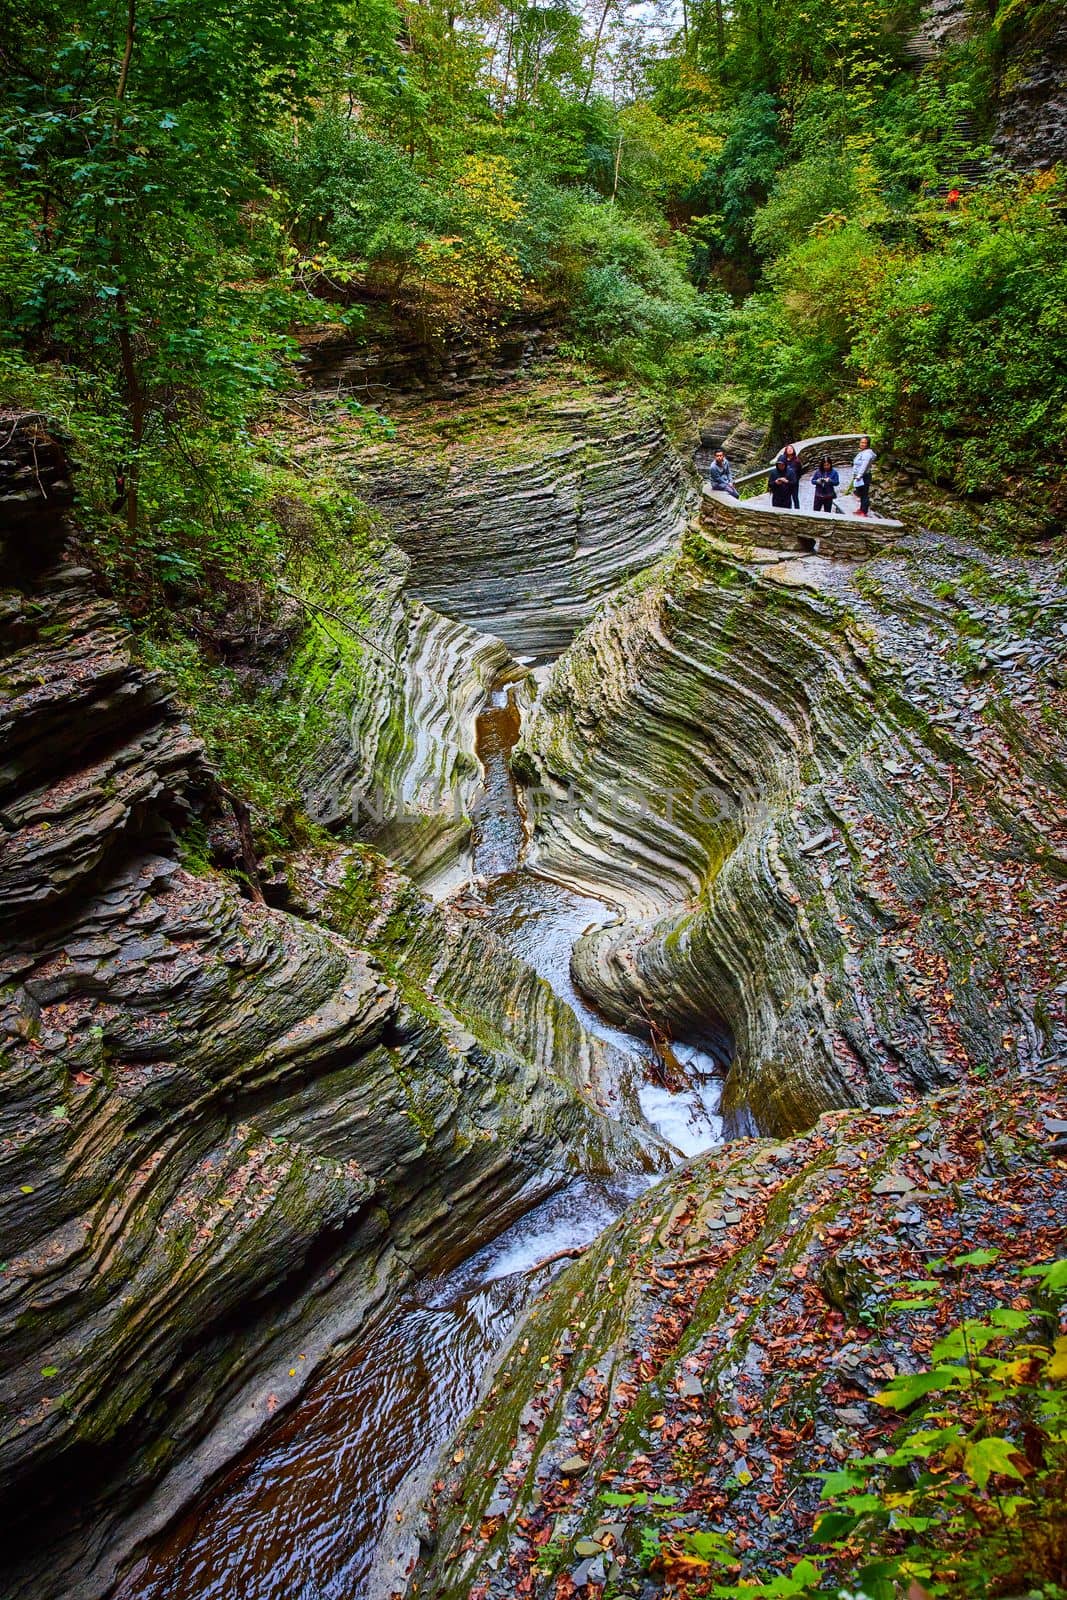 Image of Mossy and leaf covered layered rock gorge with river and overlook for tourists